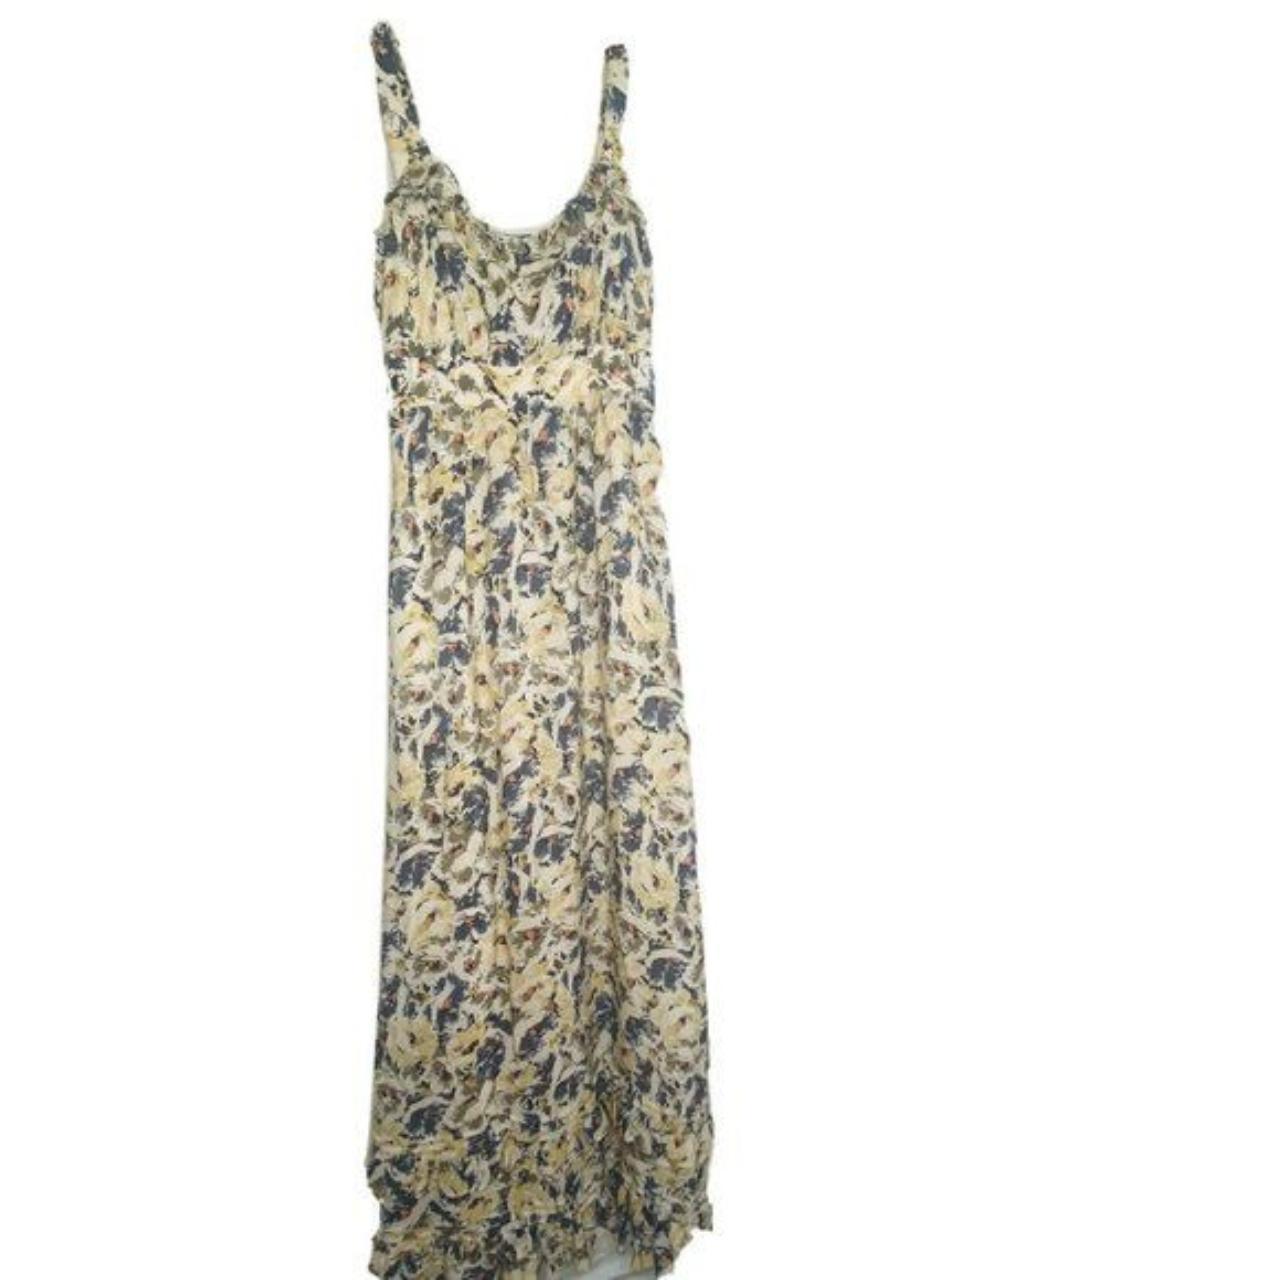 This pretty maxi dress is from Anthropologie - Depop